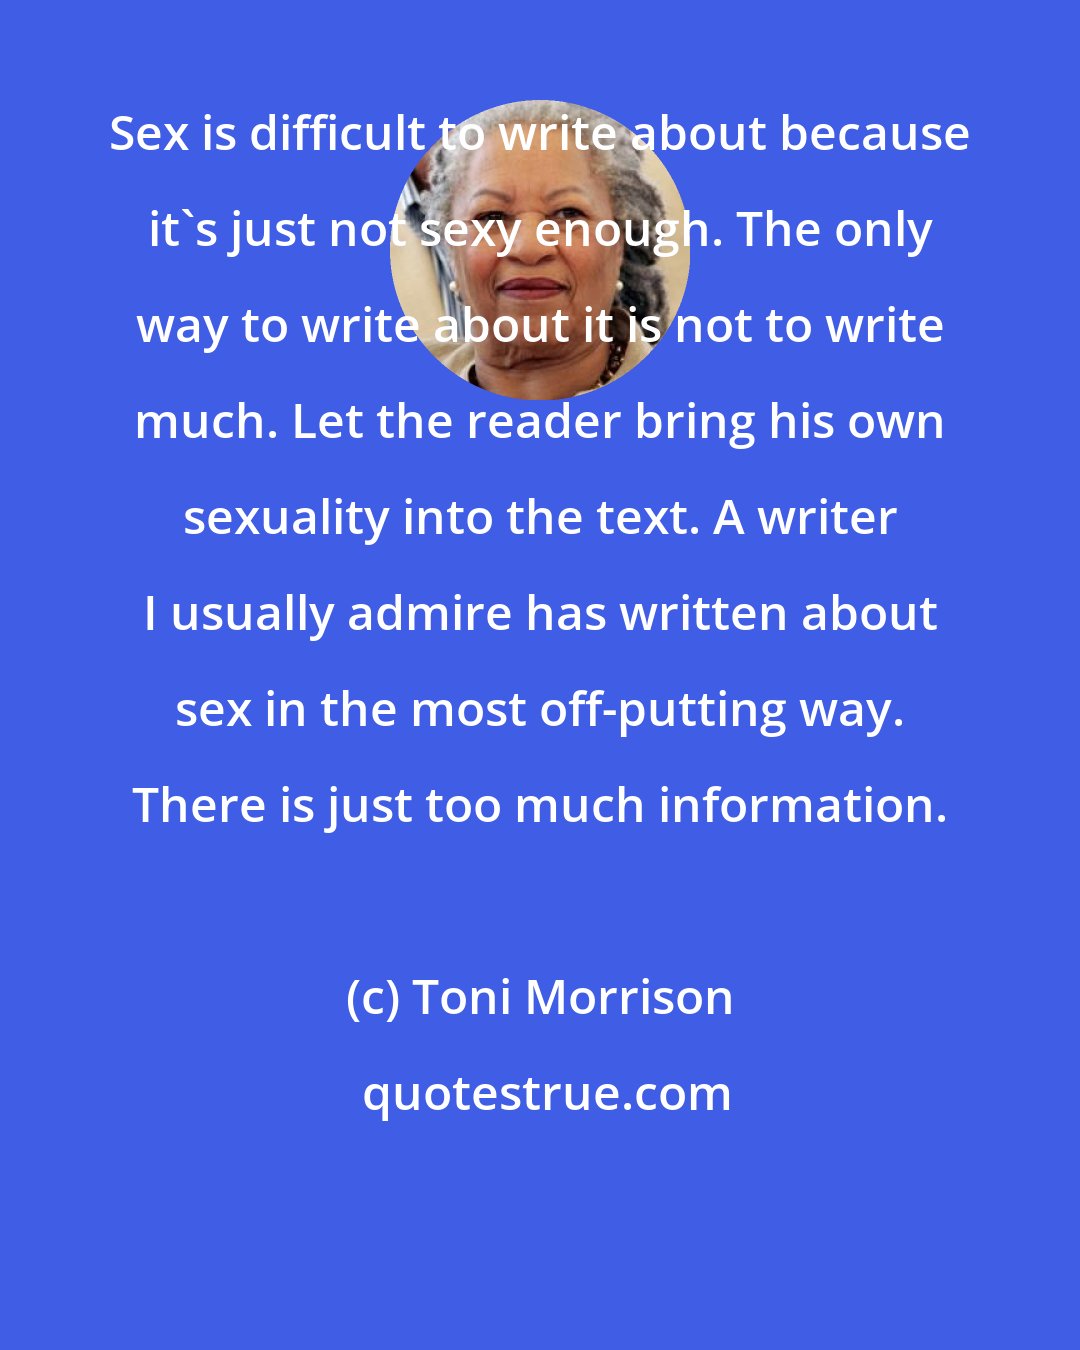 Toni Morrison: Sex is difficult to write about because it's just not sexy enough. The only way to write about it is not to write much. Let the reader bring his own sexuality into the text. A writer I usually admire has written about sex in the most off-putting way. There is just too much information.